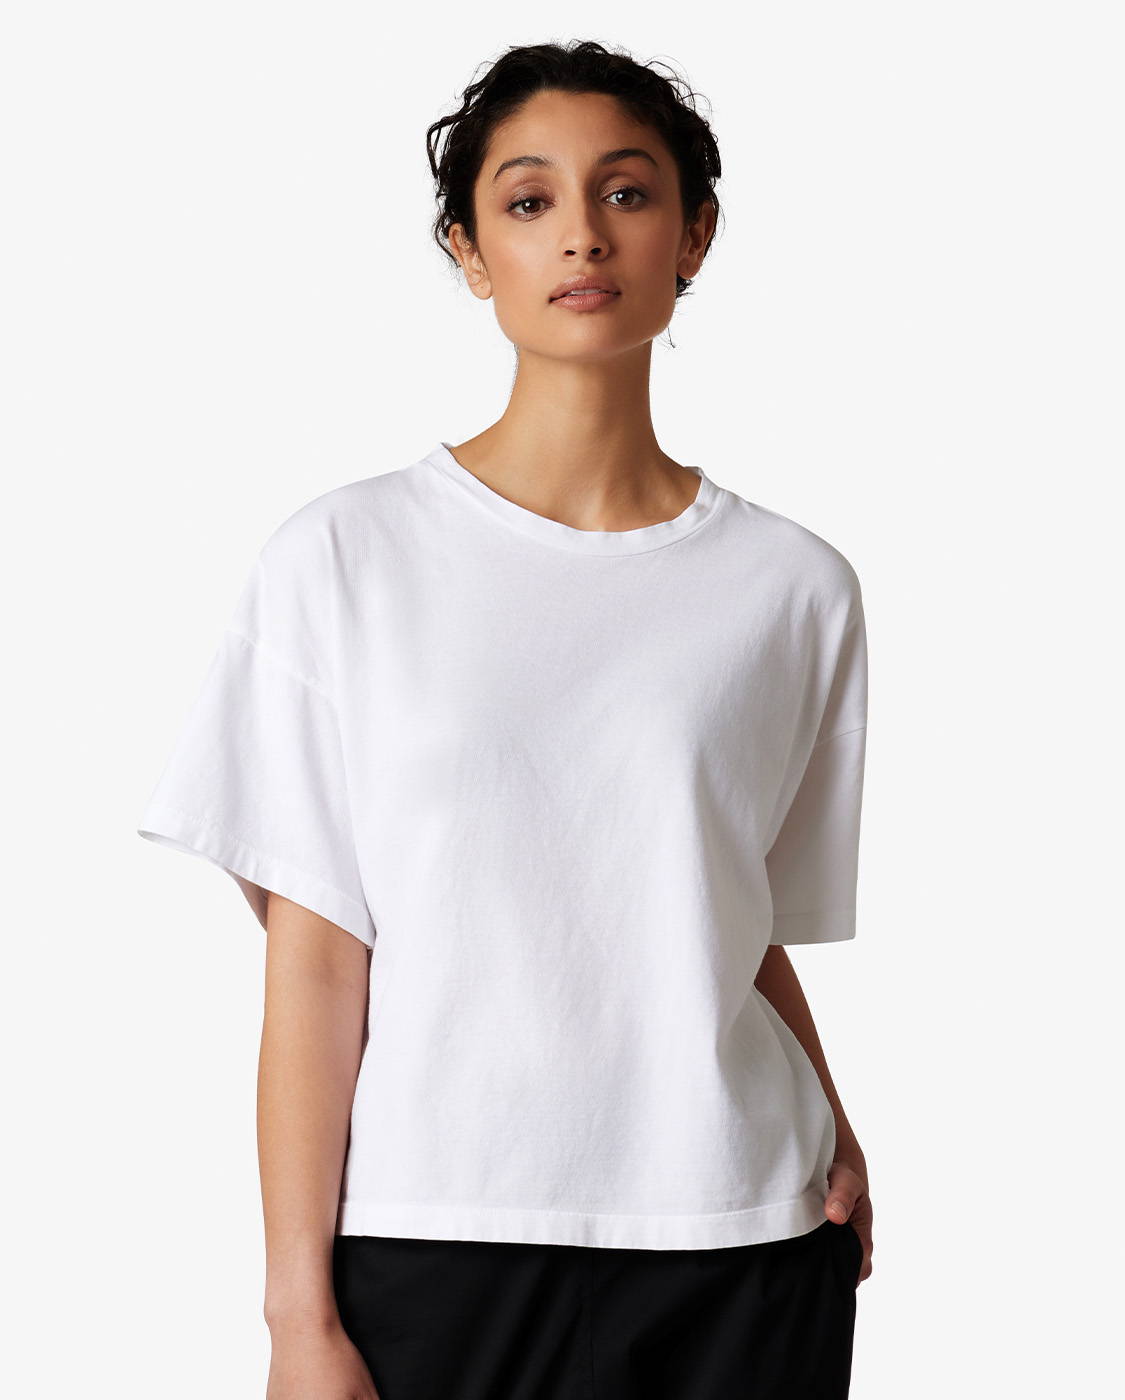 White Shirts Collection – TKEES